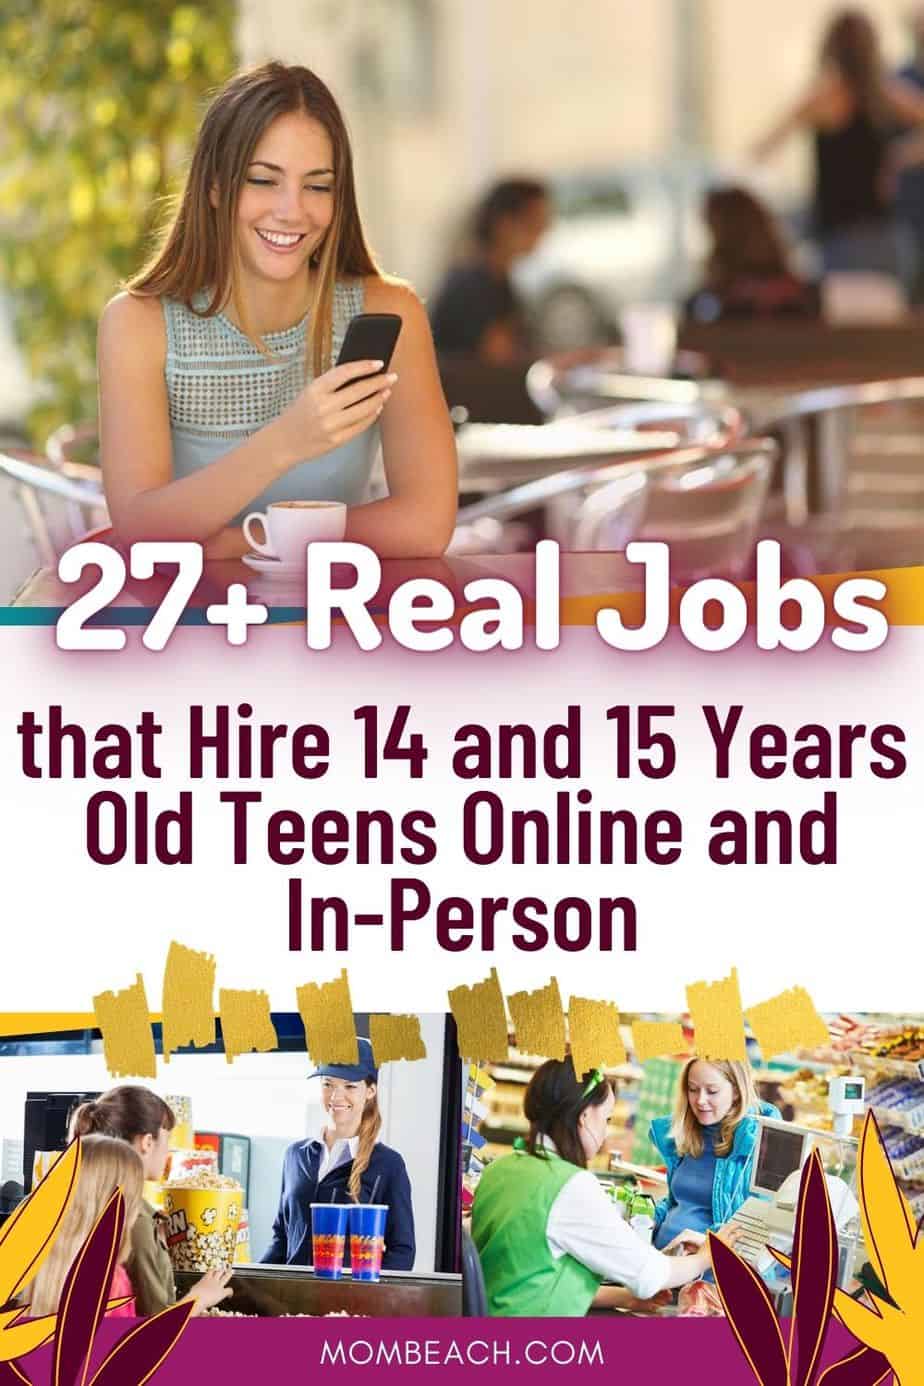 Real Jobs For 14 And15 Year Old Teens Pin1 